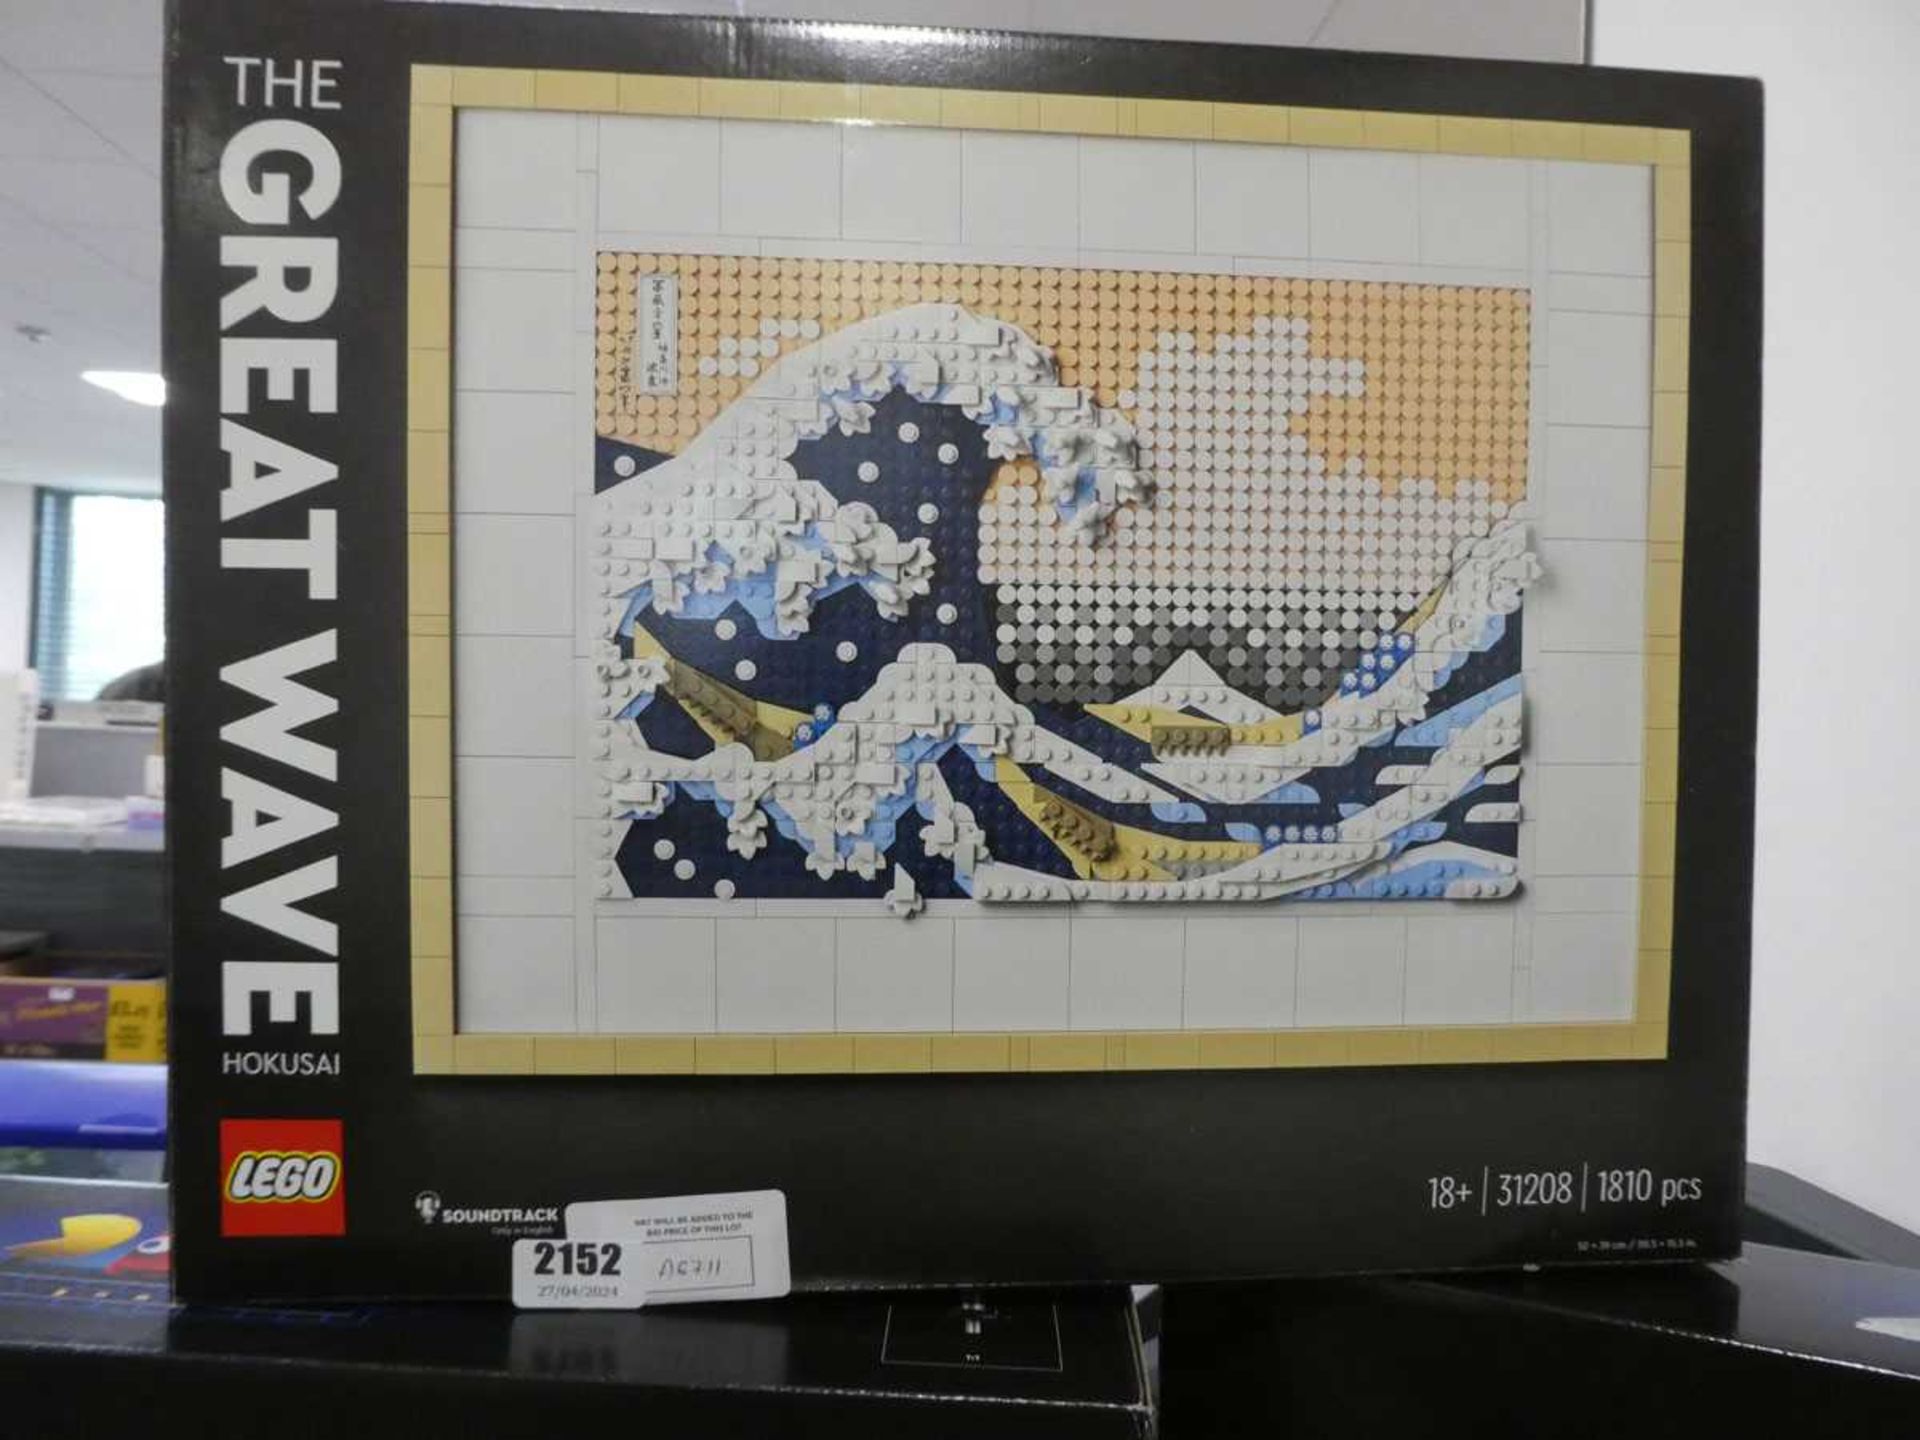 +VAT LEGO 31208 Art Hokusai The Great Wave All LEGO is unchecked. No guarantee that LEGO in boxes is